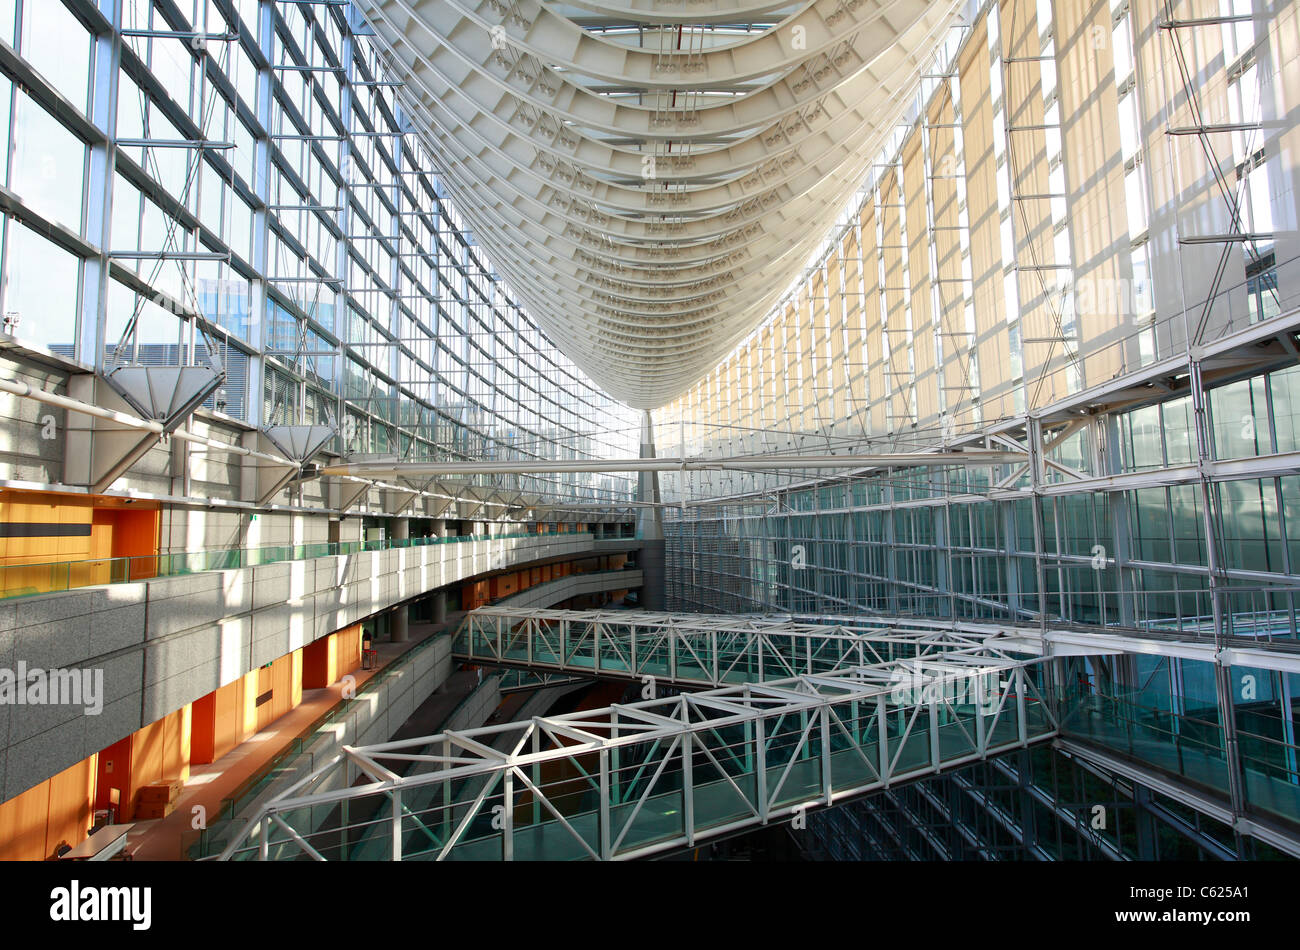 TOKYO - AUGUST 4: Inside the Tokyo International Forum building on August 4, 2011 in Tokyo. Stock Photo